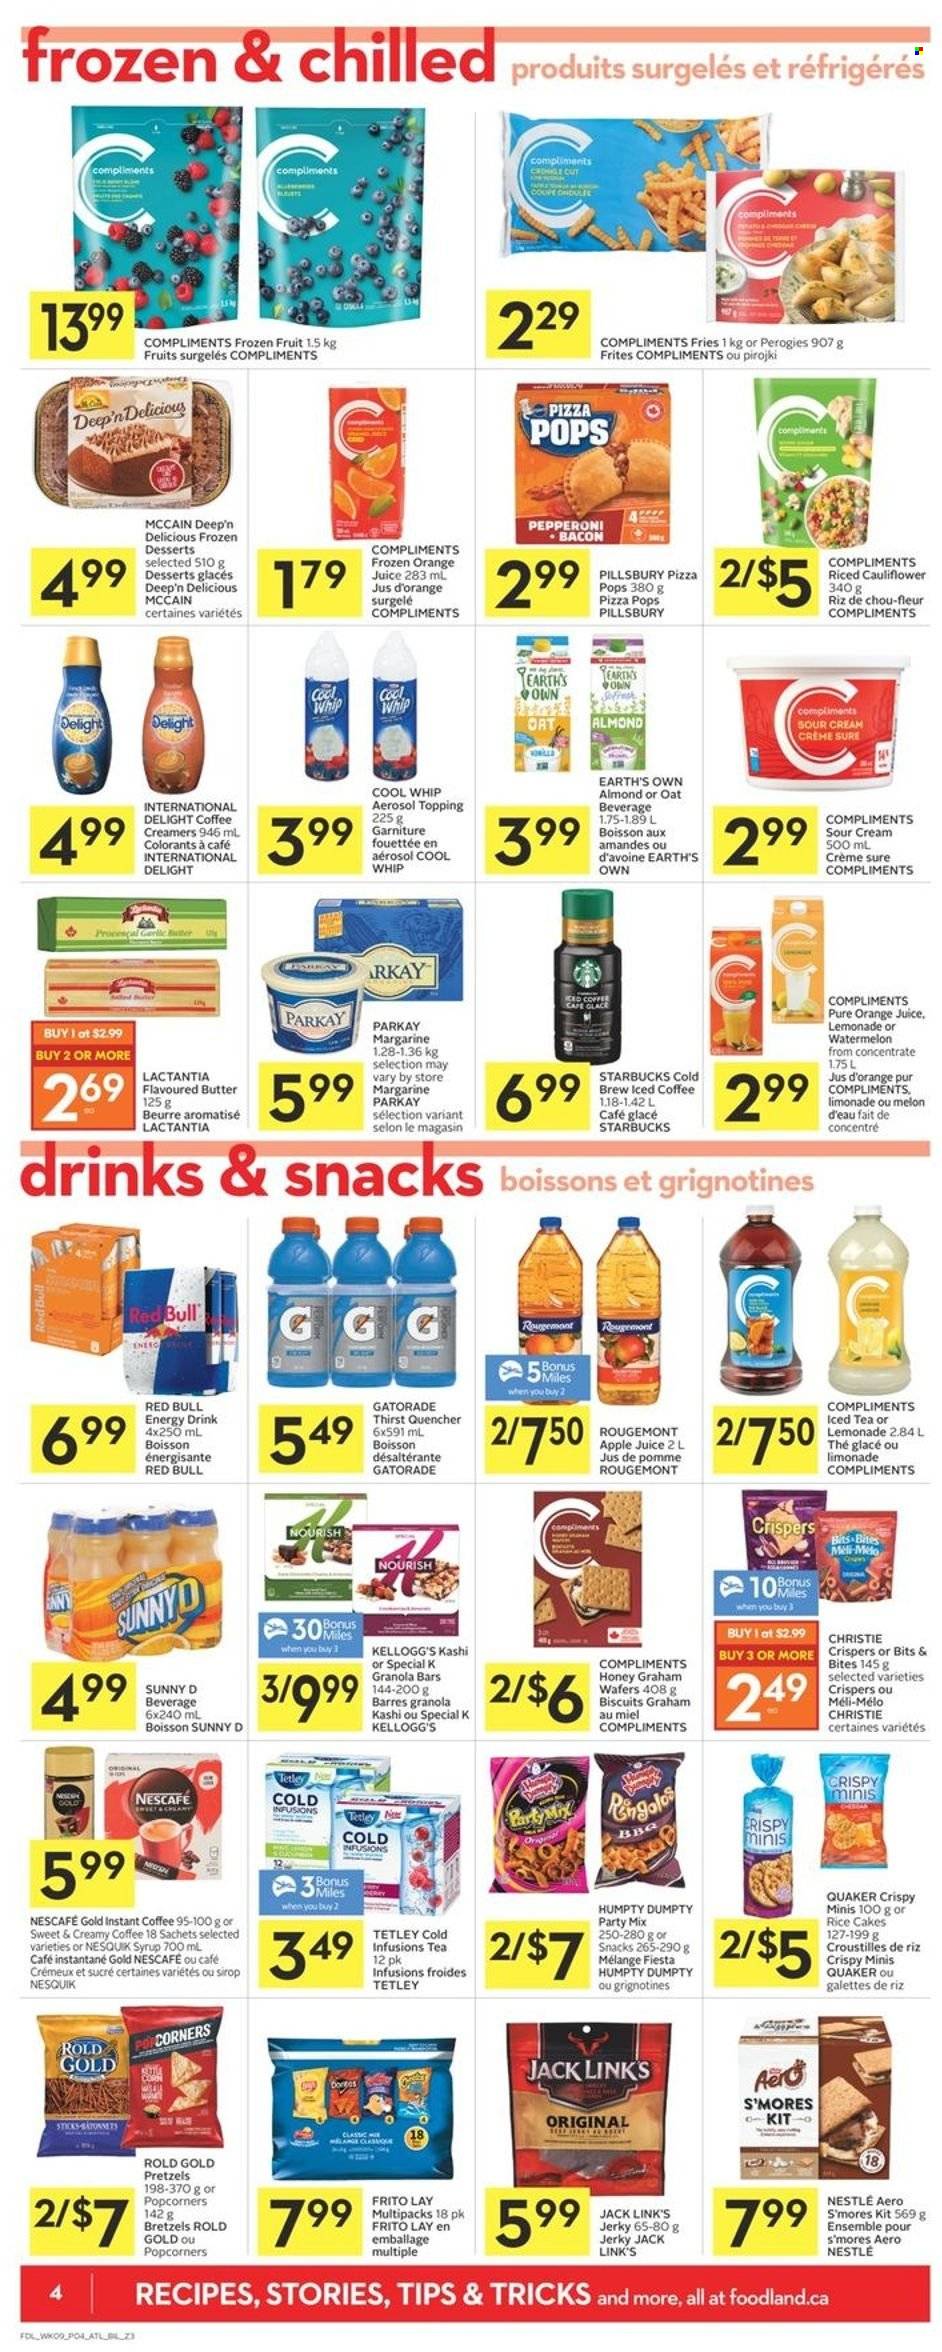 thumbnail - Co-op Flyer - June 30, 2022 - July 06, 2022 - Sales products - pretzels, watermelon, melons, pizza, Pillsbury, Quaker, bacon, jerky, pepperoni, butter, margarine, Cool Whip, sour cream, McCain, potato fries, wafers, Kellogg's, biscuit, popcorn, Jack Link's, topping, granola bar, honey, syrup, apple juice, lemonade, orange juice, juice, energy drink, ice tea, Red Bull, Gatorade, iced coffee, instant coffee, Starbucks, Rin, Sure, Nestlé, Nescafé, Nesquik. Page 4.